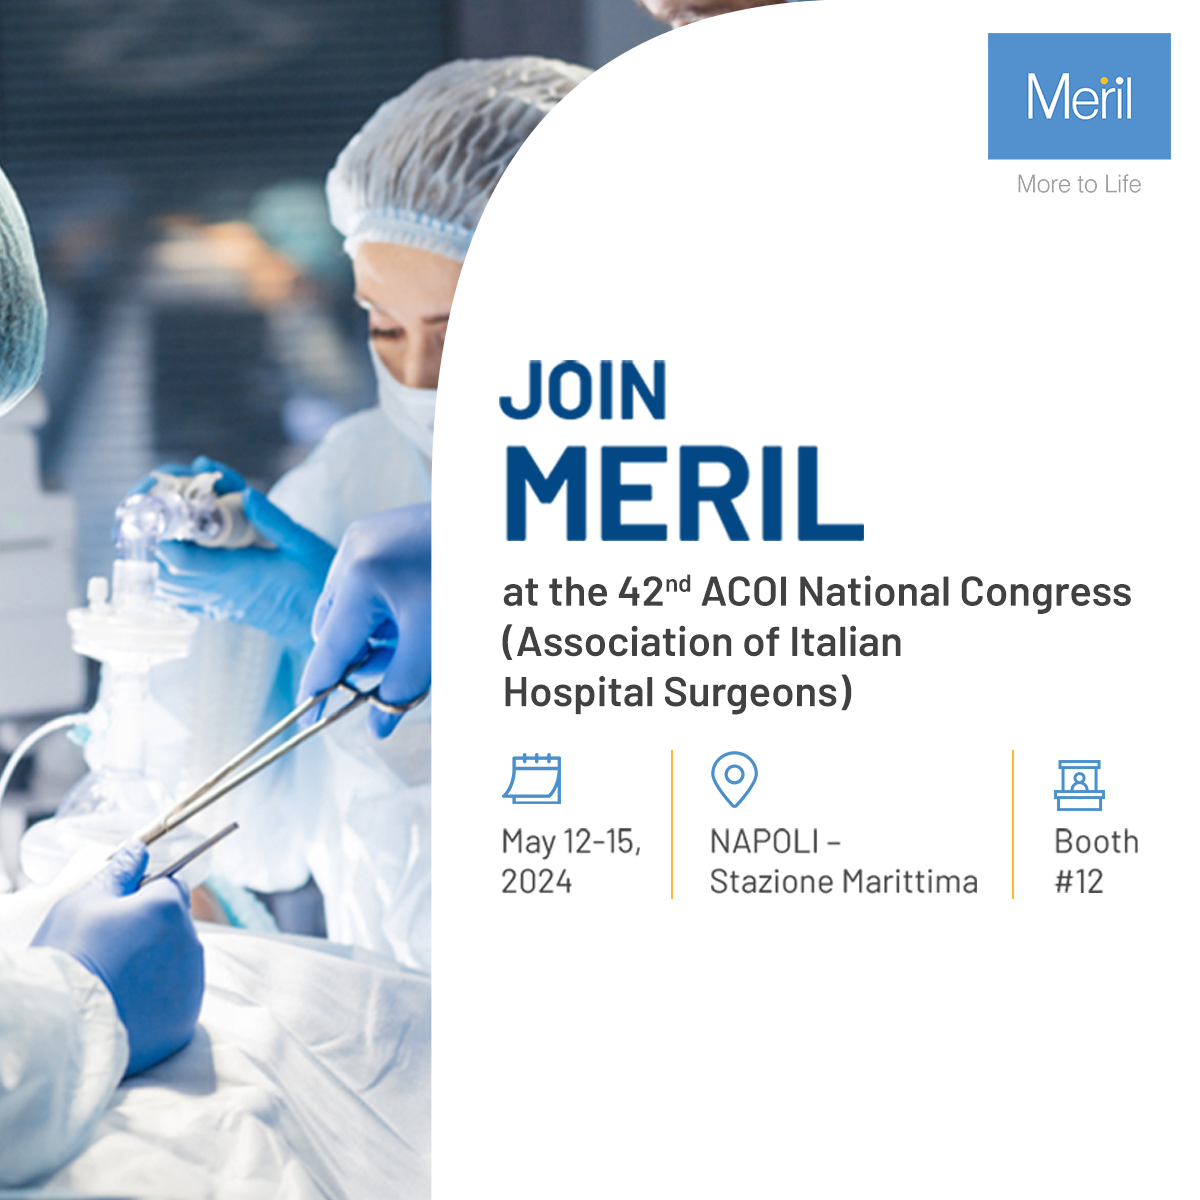 Meet Meril at 42nd ACOI National Congress - Save the dates!